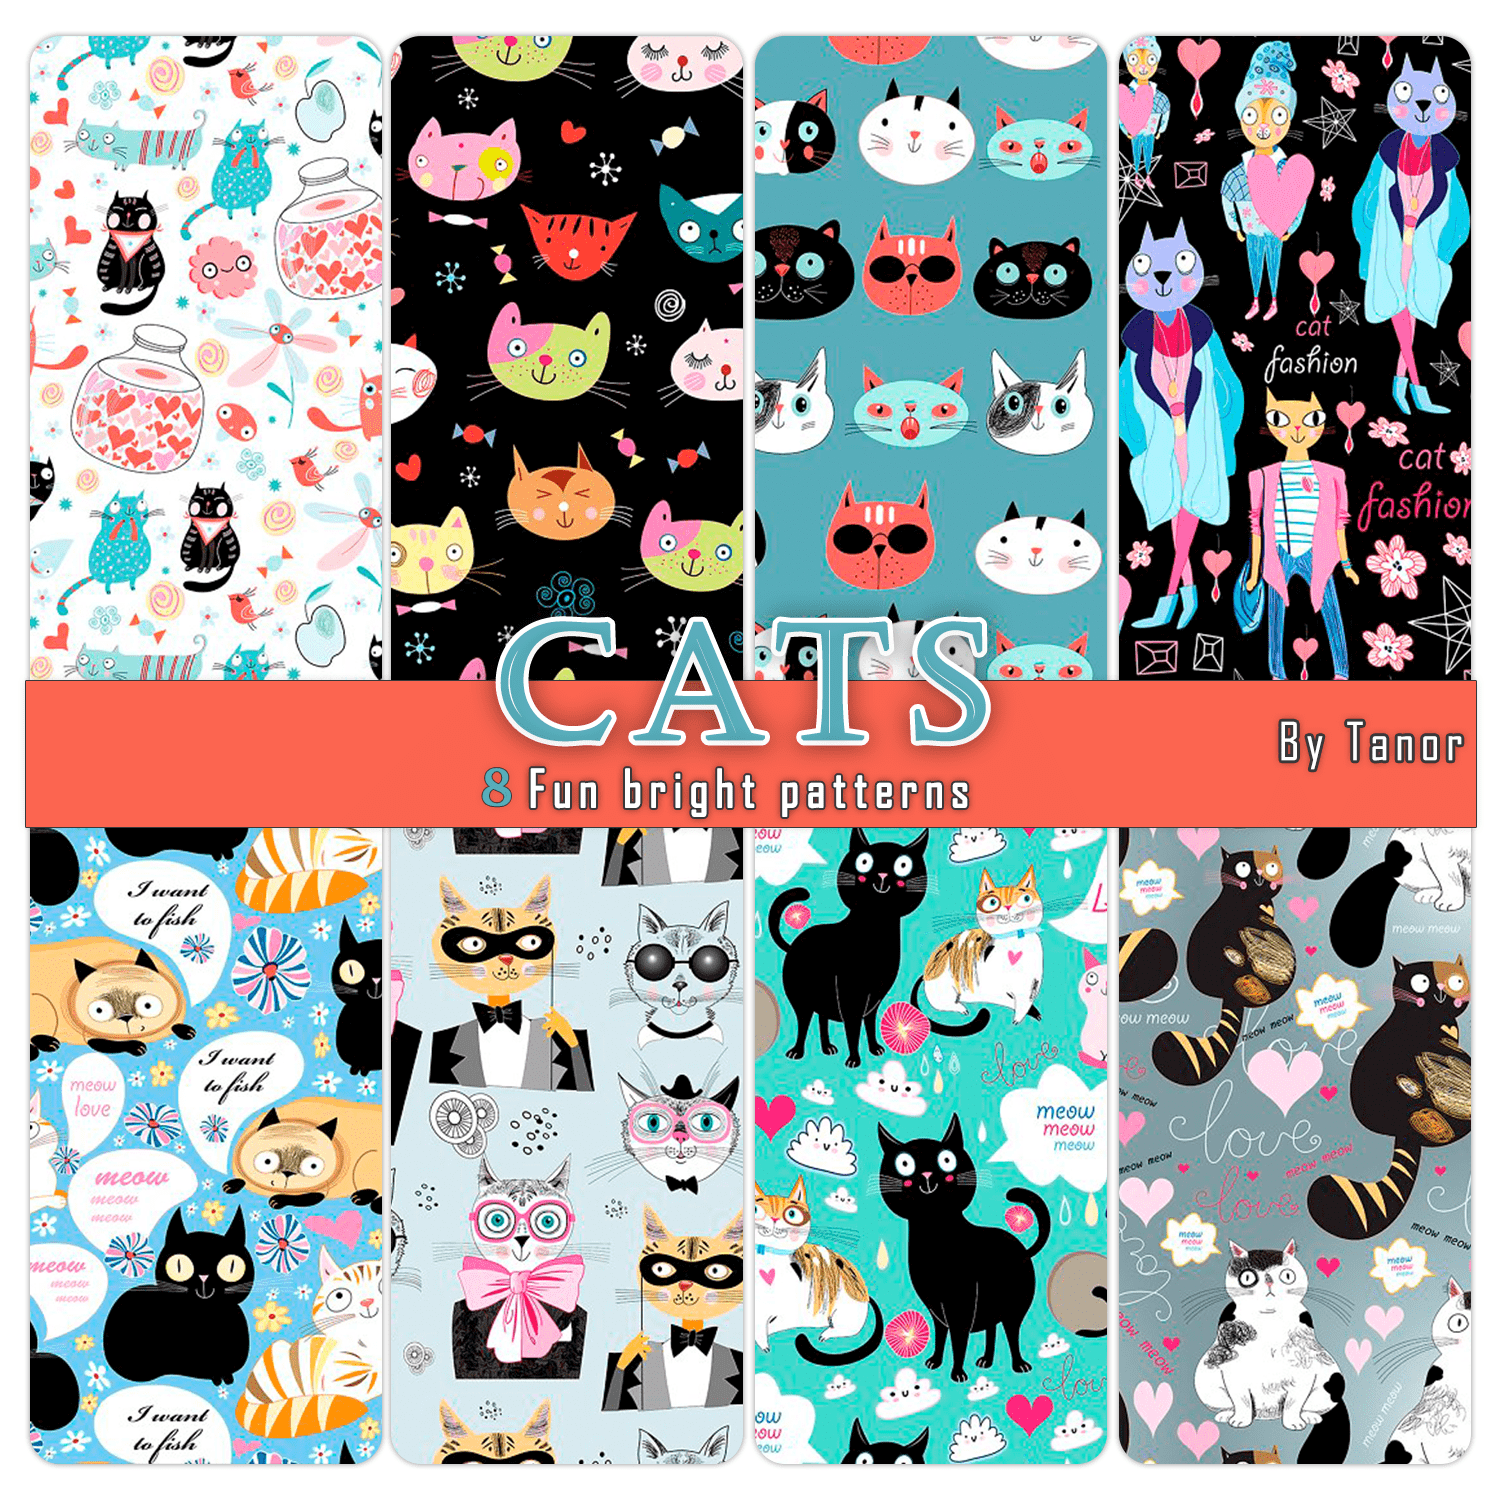 8 Fun bright patterns with cats cover.